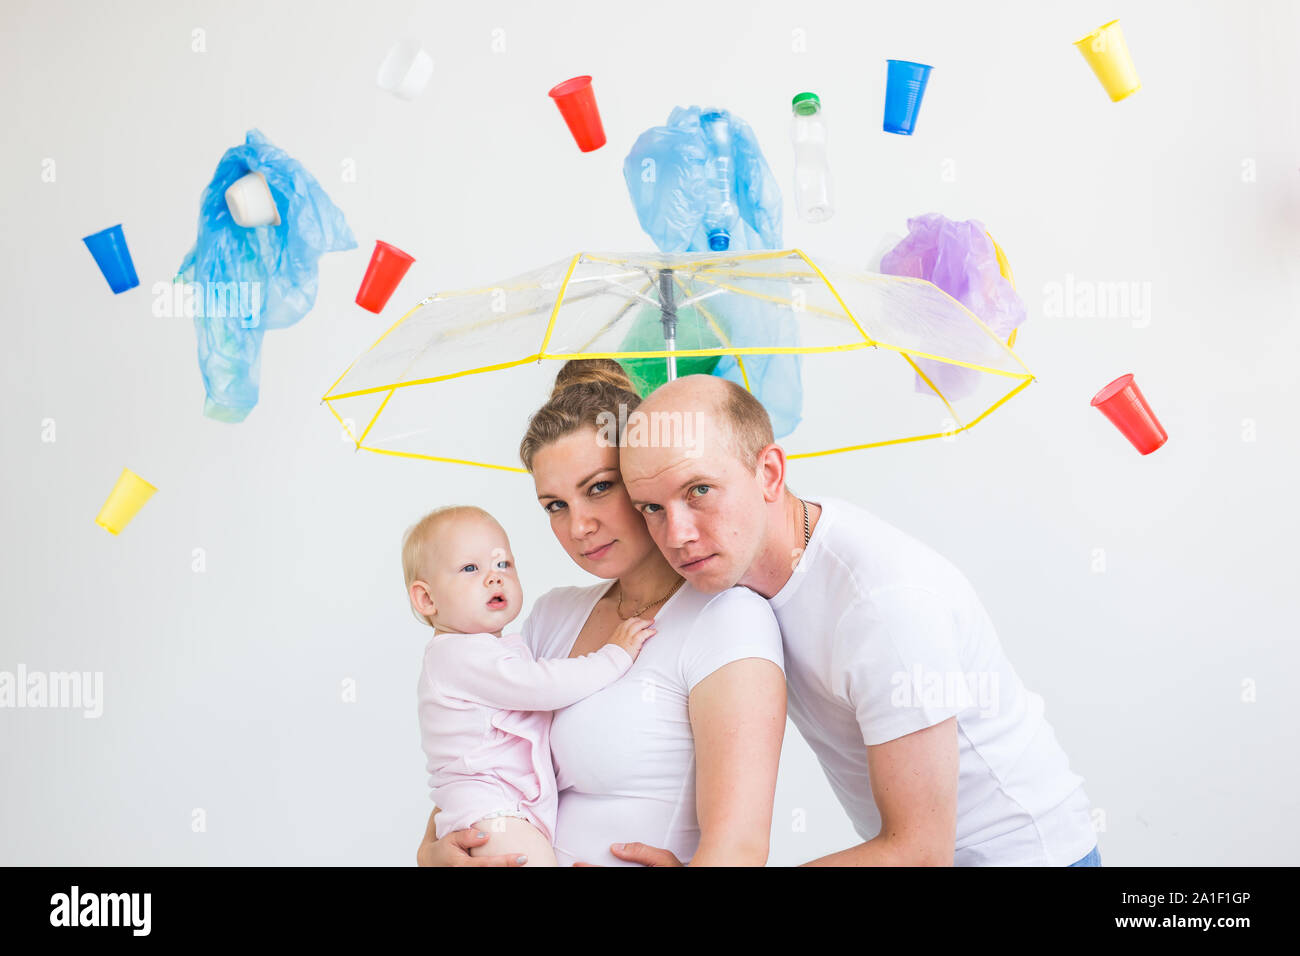 Environmental pollution, plastic recycling problem and waste disposal concept - surprised family under garbage on white background. Stock Photo